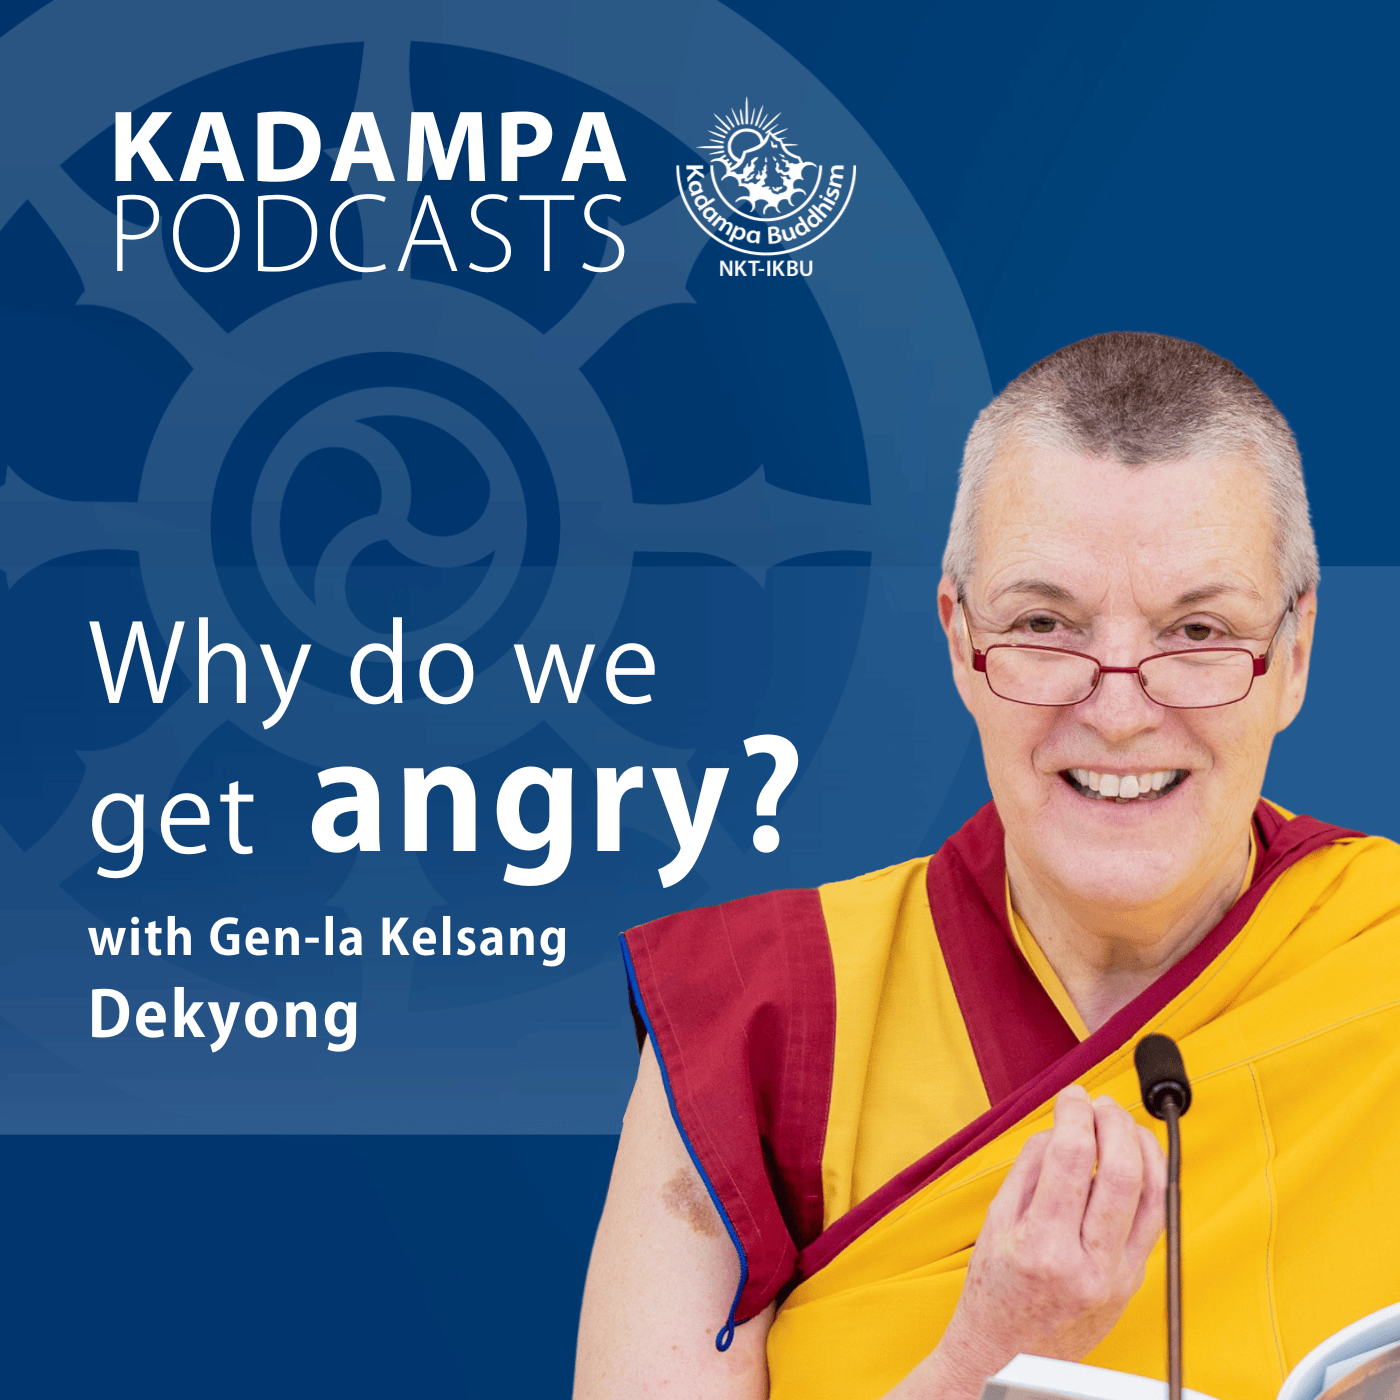 Why do we get angry?